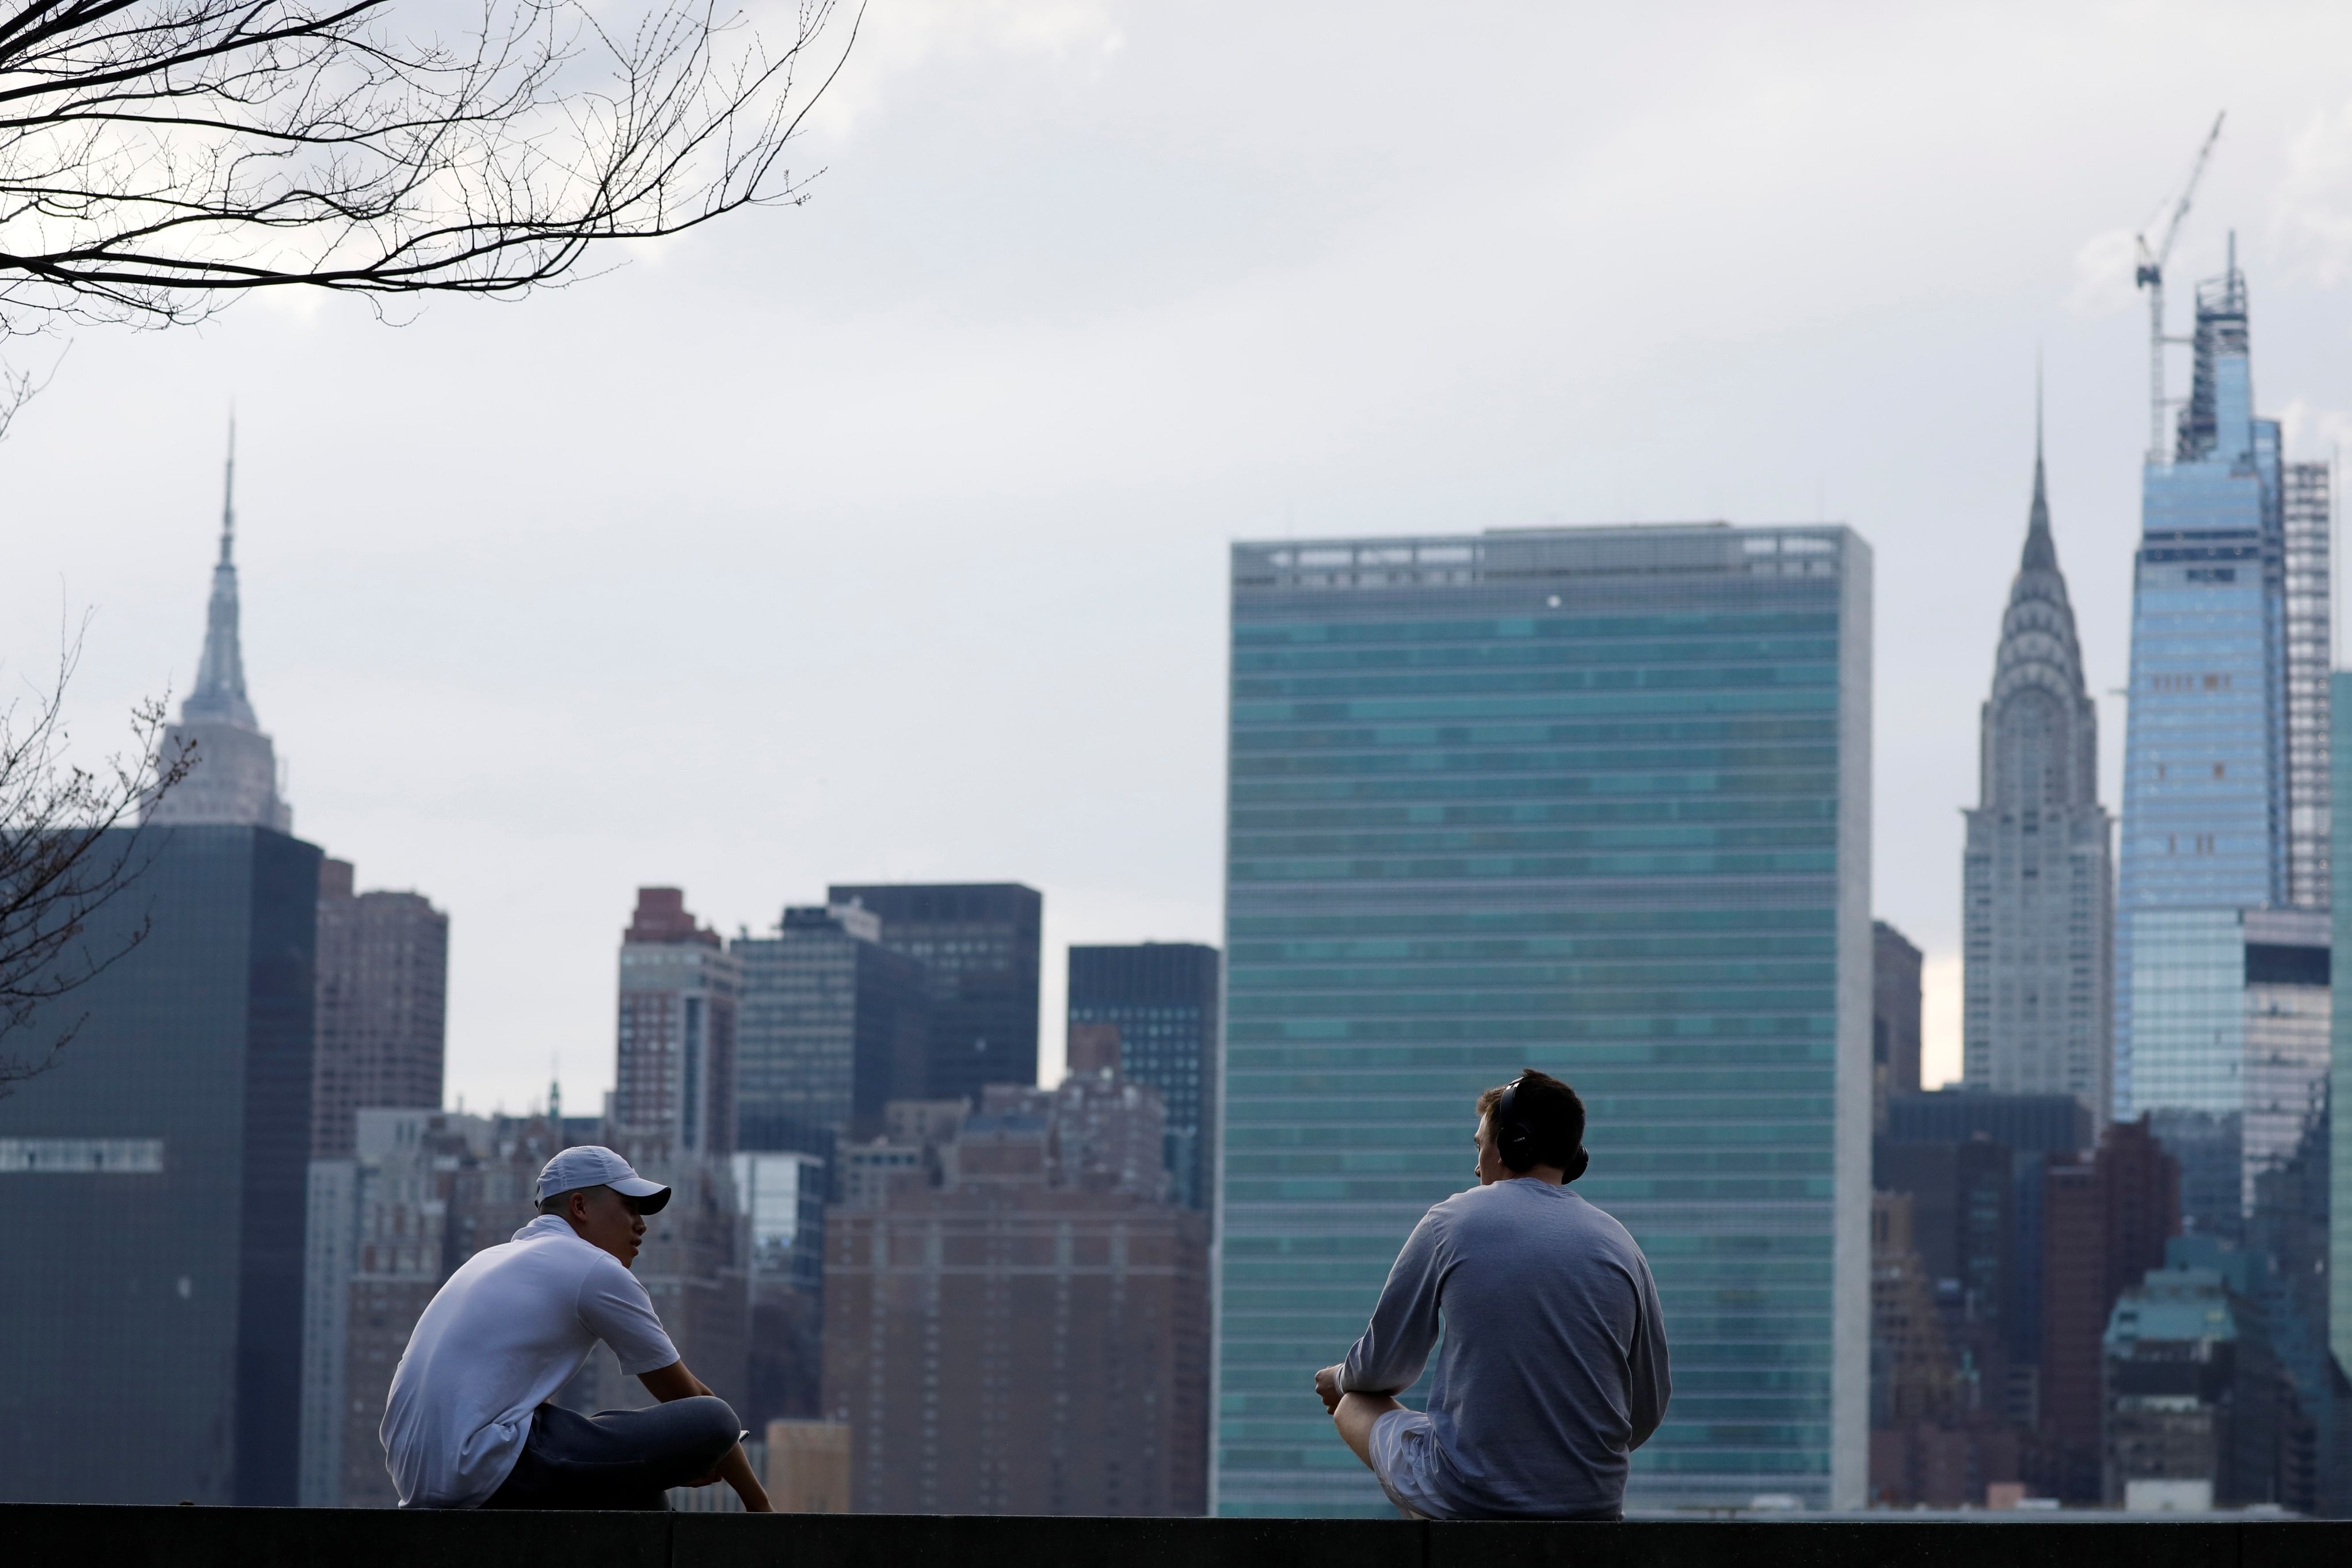 People talk to each other from a distance in front of the Manhattan skyline as the coronavirus disease (COVID-19) outbreak continues. (Credit: Reuters)